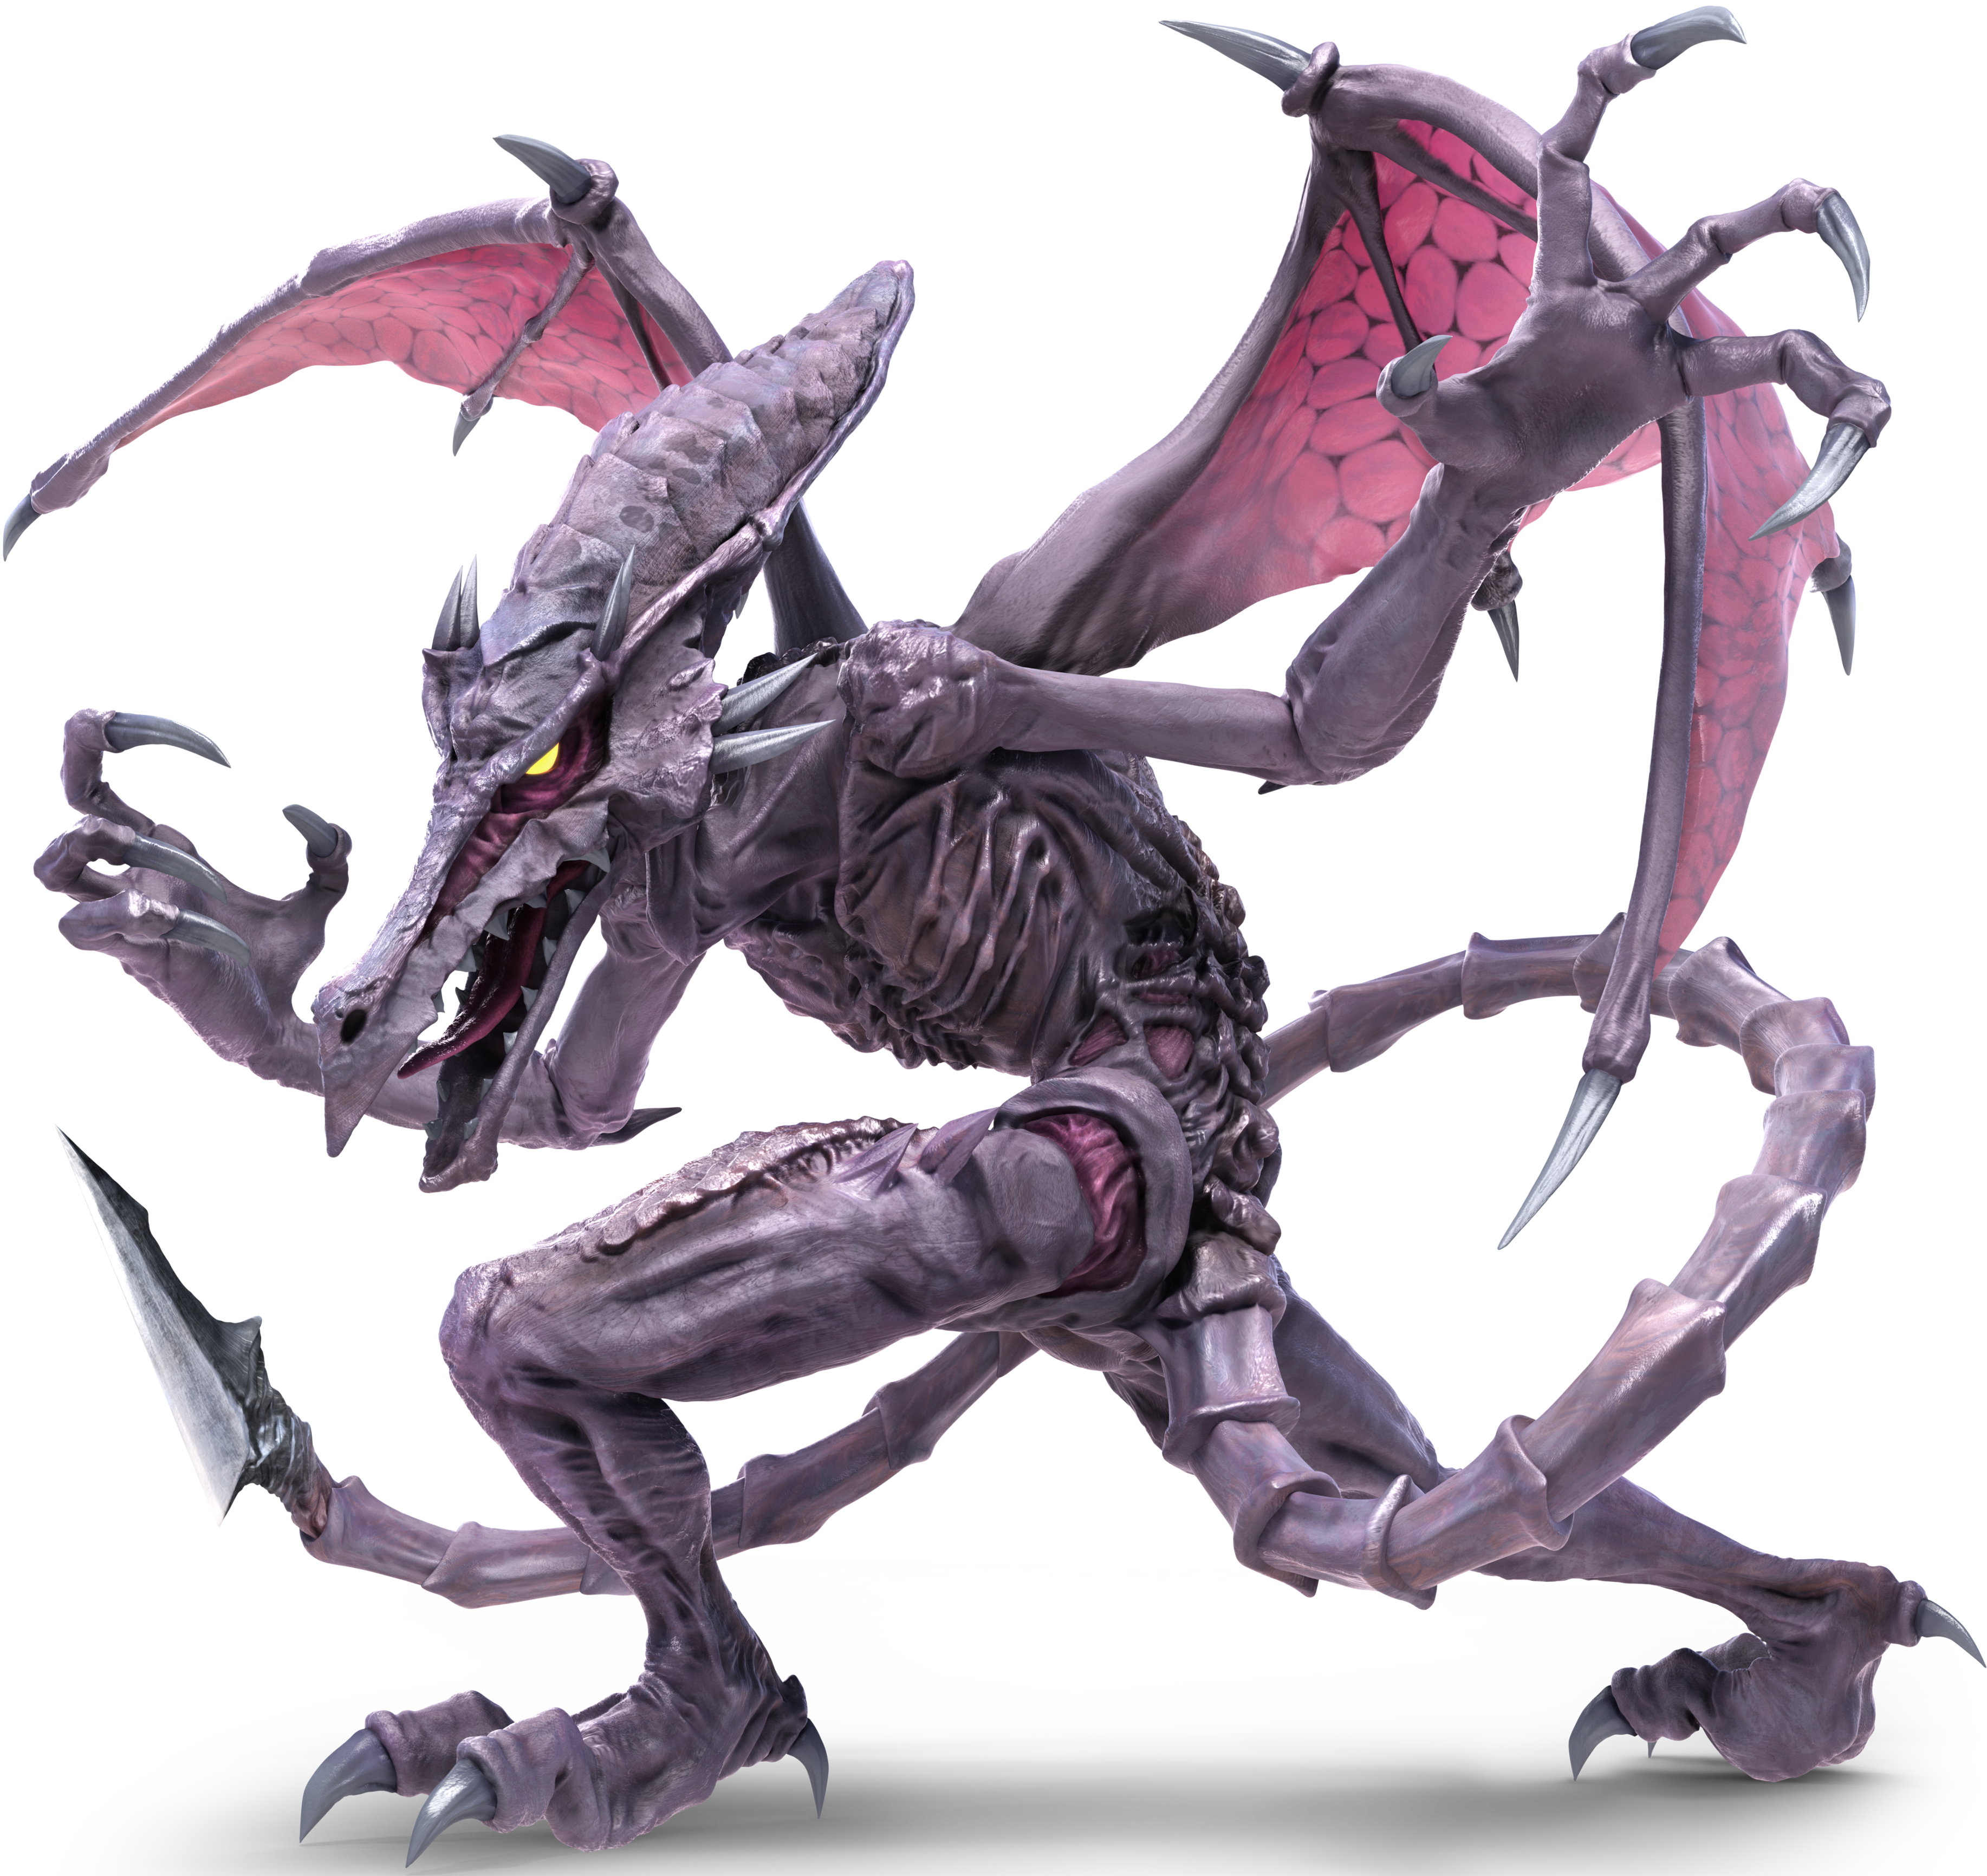 download metroid other m ridley for free